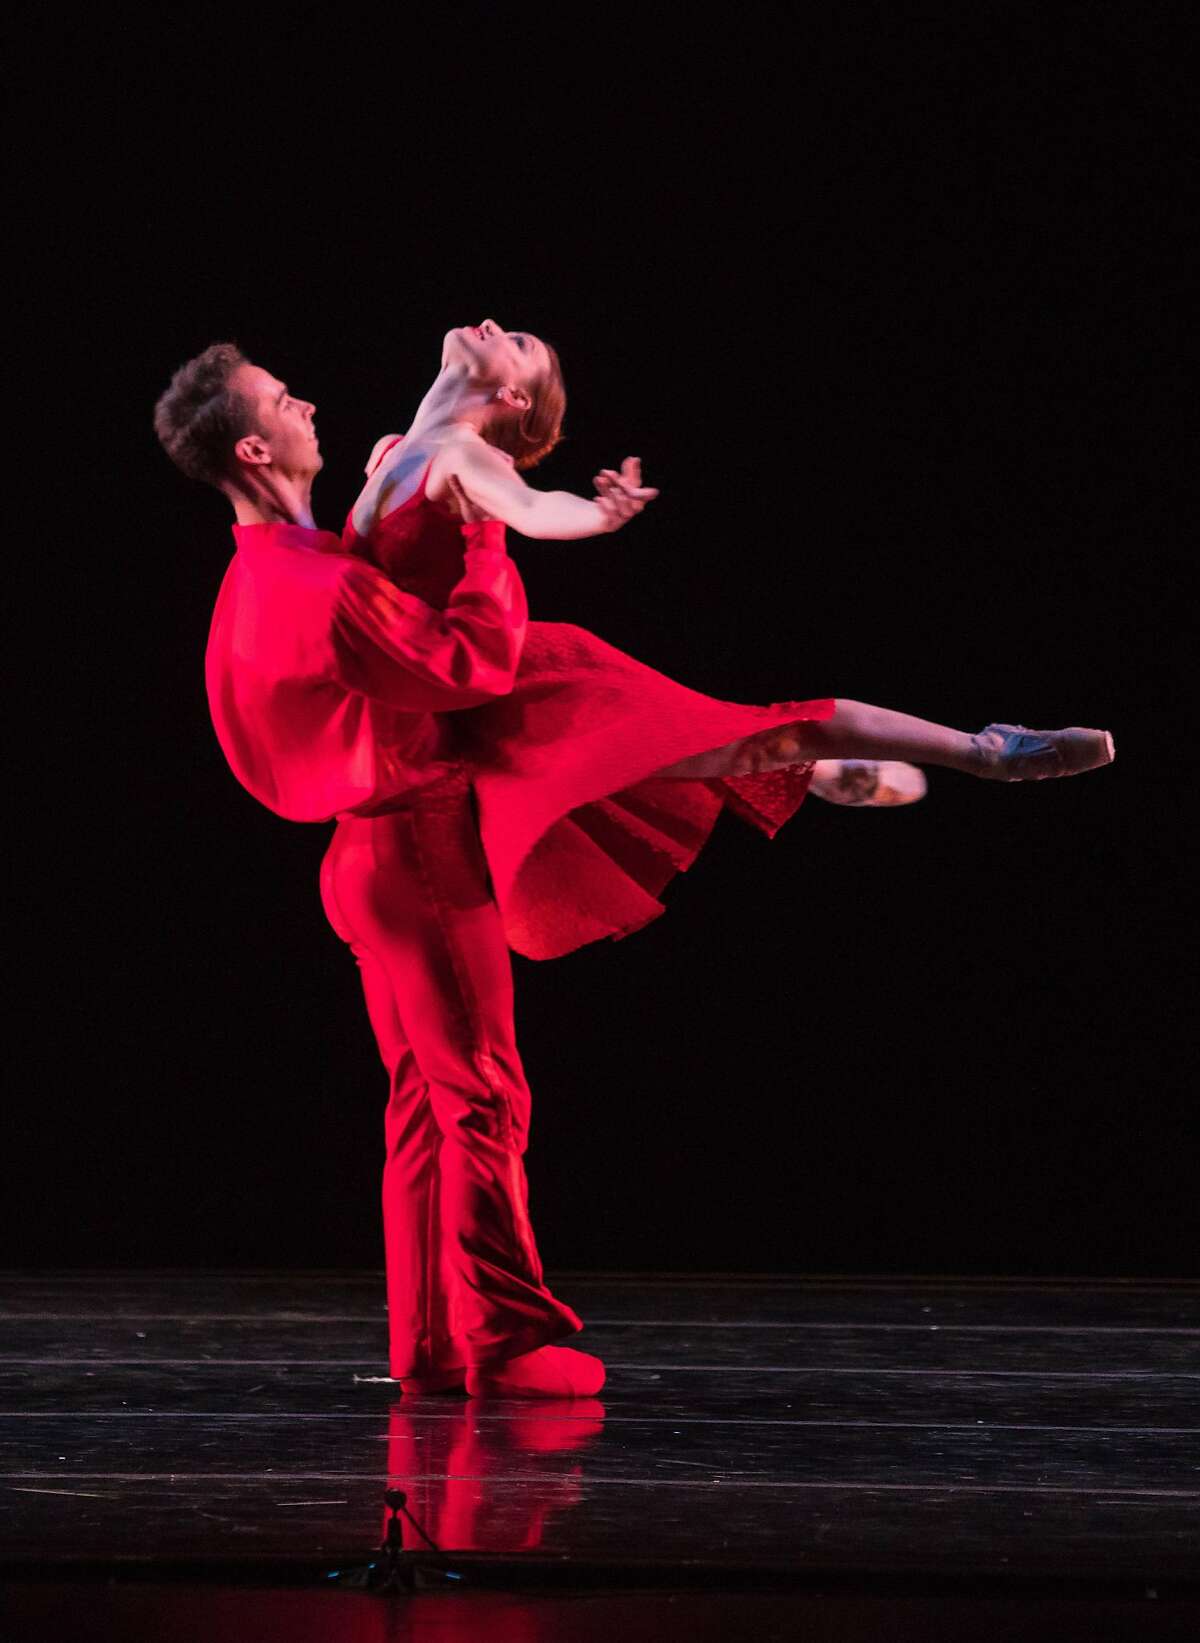 Ben Needham-Wood lifts Erin Yarbrough-Powell in "River" - a new work choreographed by Amy Seiwert for Smuin's annual The Christmas Ballet, playing through Dec. 24 in Walnut Creek, Carmel, Mountain View, and San Francisco. Photo credit: Keith Sutter